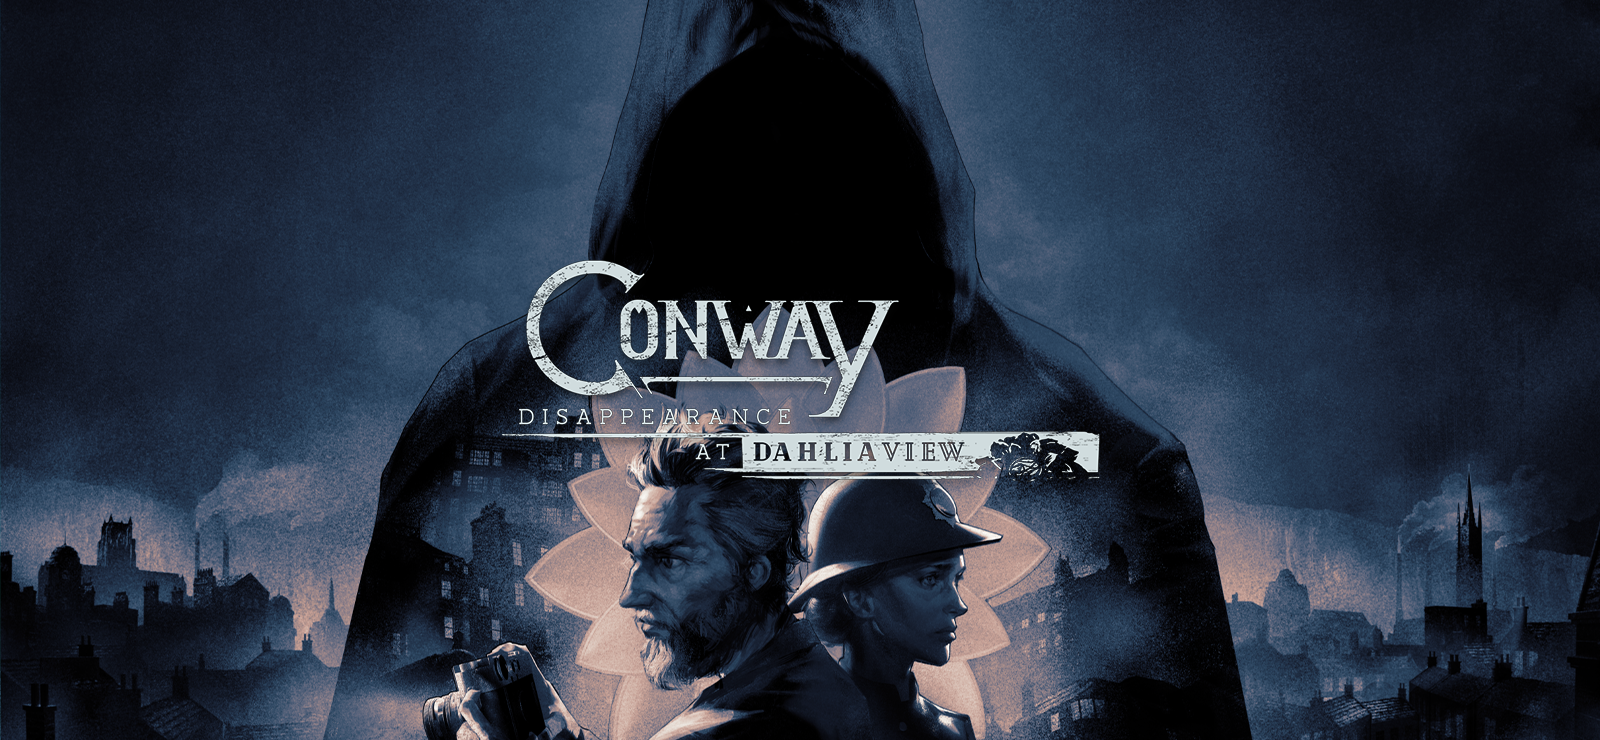 Conway: Disappearance At Dahlia View